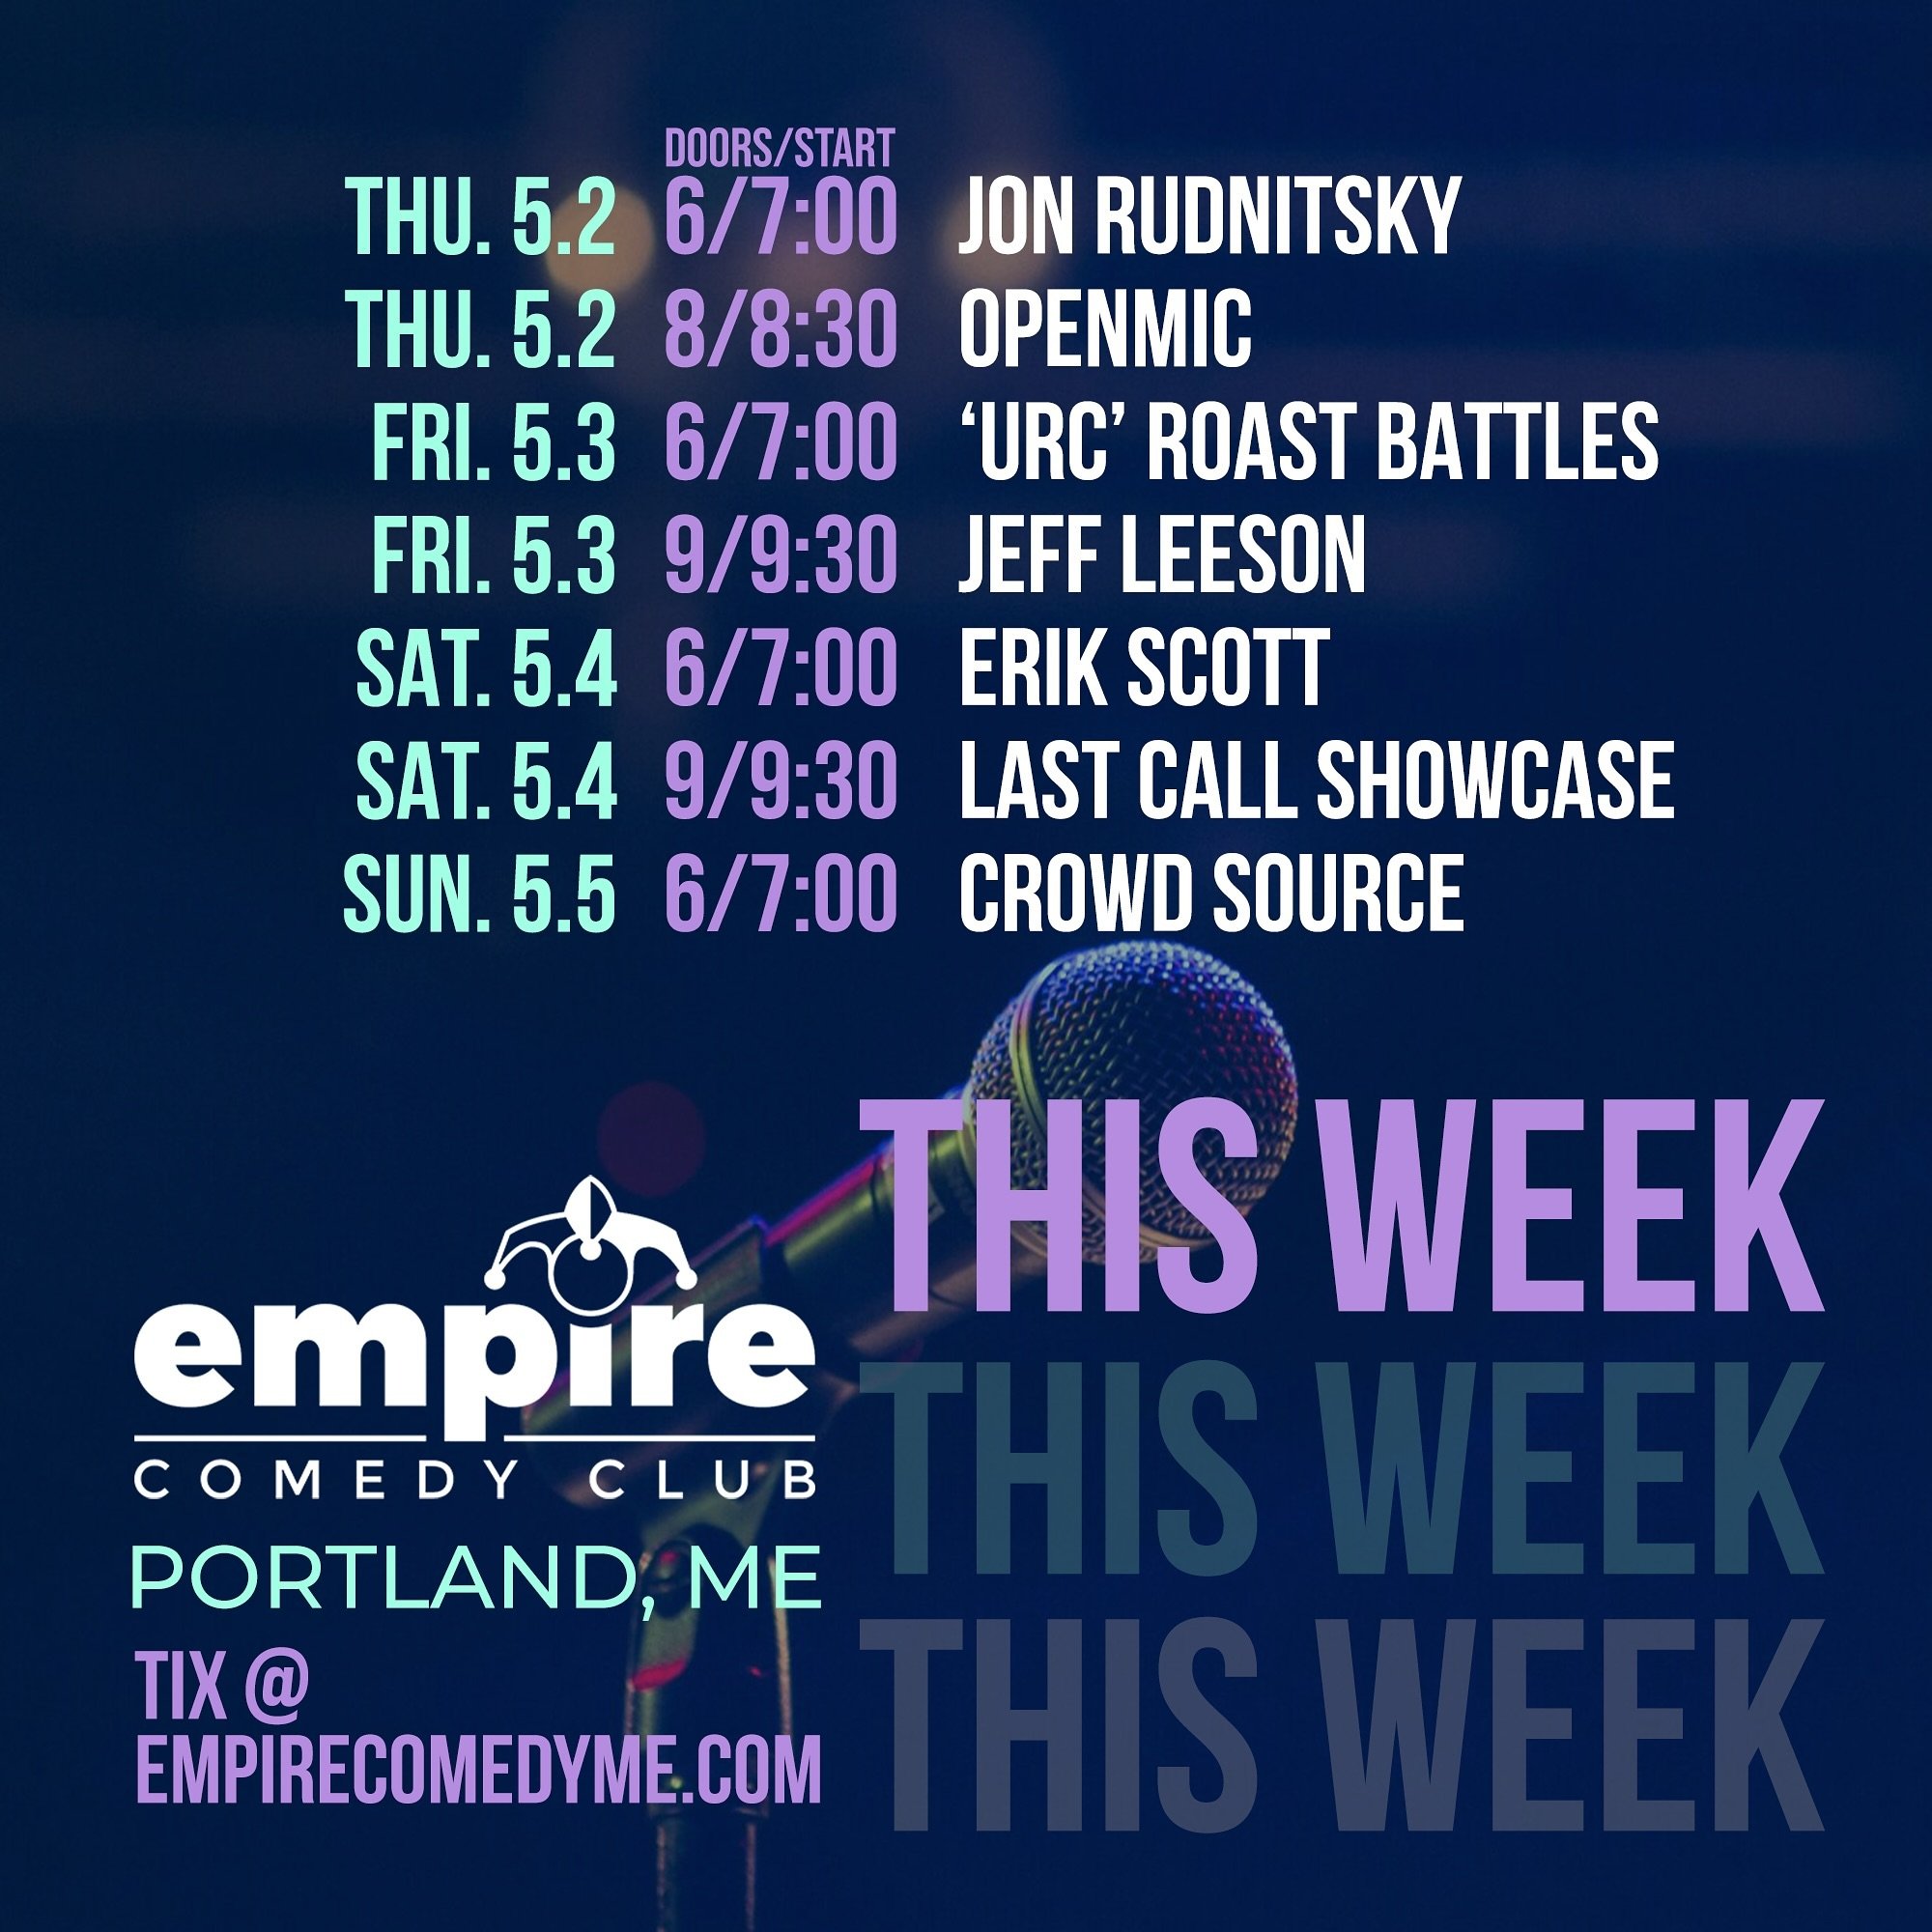 #THISWEEK at Empire Comedy Club in Portland, ME! 
Tickets @ link in bio 🎟️
&bull;
#empirecomedyclub #comedyclub #maine #portlandmaine #thingstodoinmaine #comedyinmaine #mainecomedy #comedy #standupcomedy #standup #207 #laughter #jokes #funny #humor 